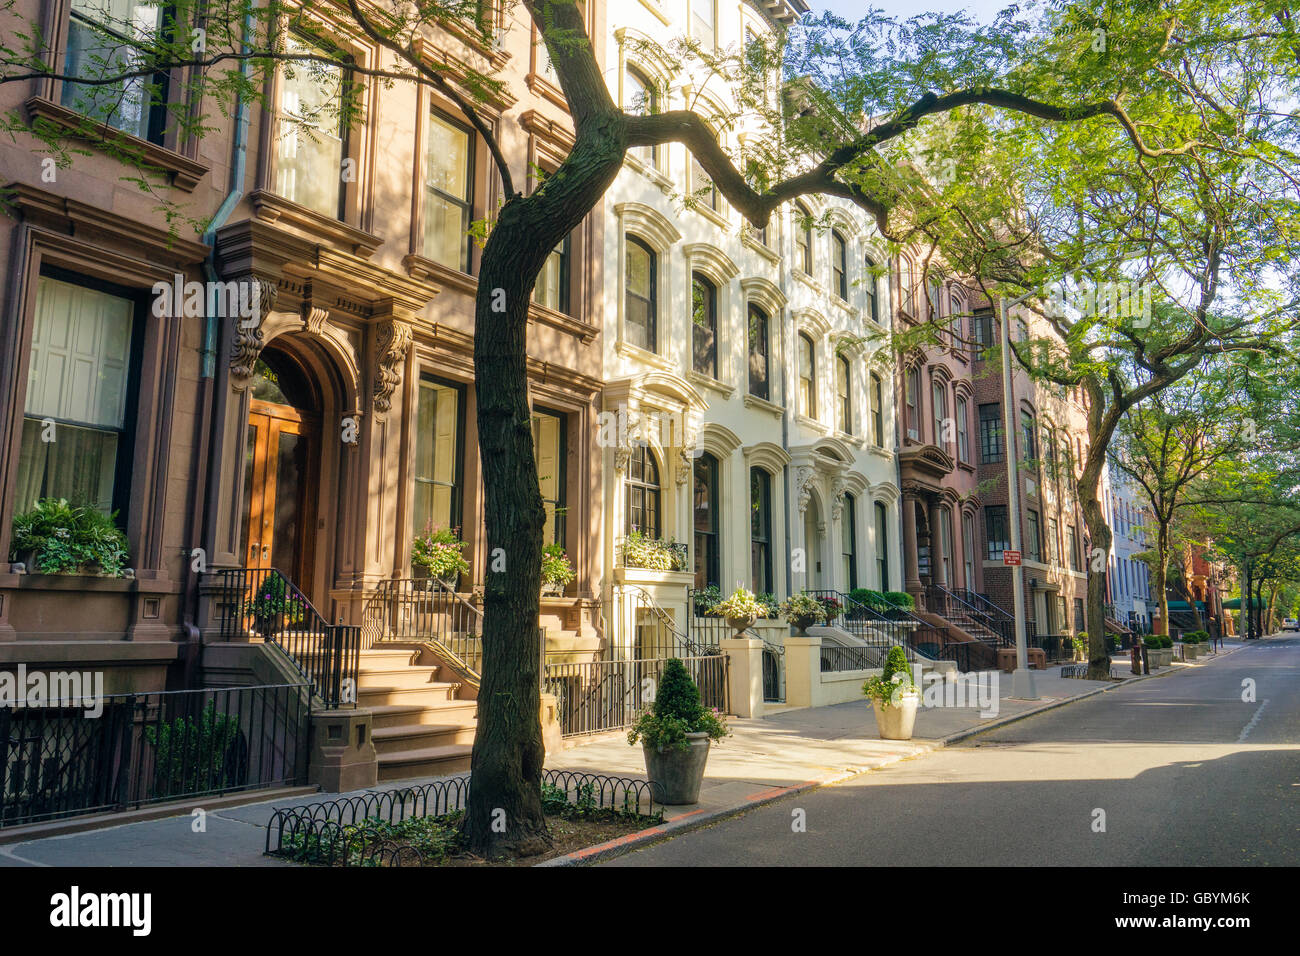 Attractive brownstone buildings along a sun-dappled residential street in Brooklyn Heights, New York Stock Photo